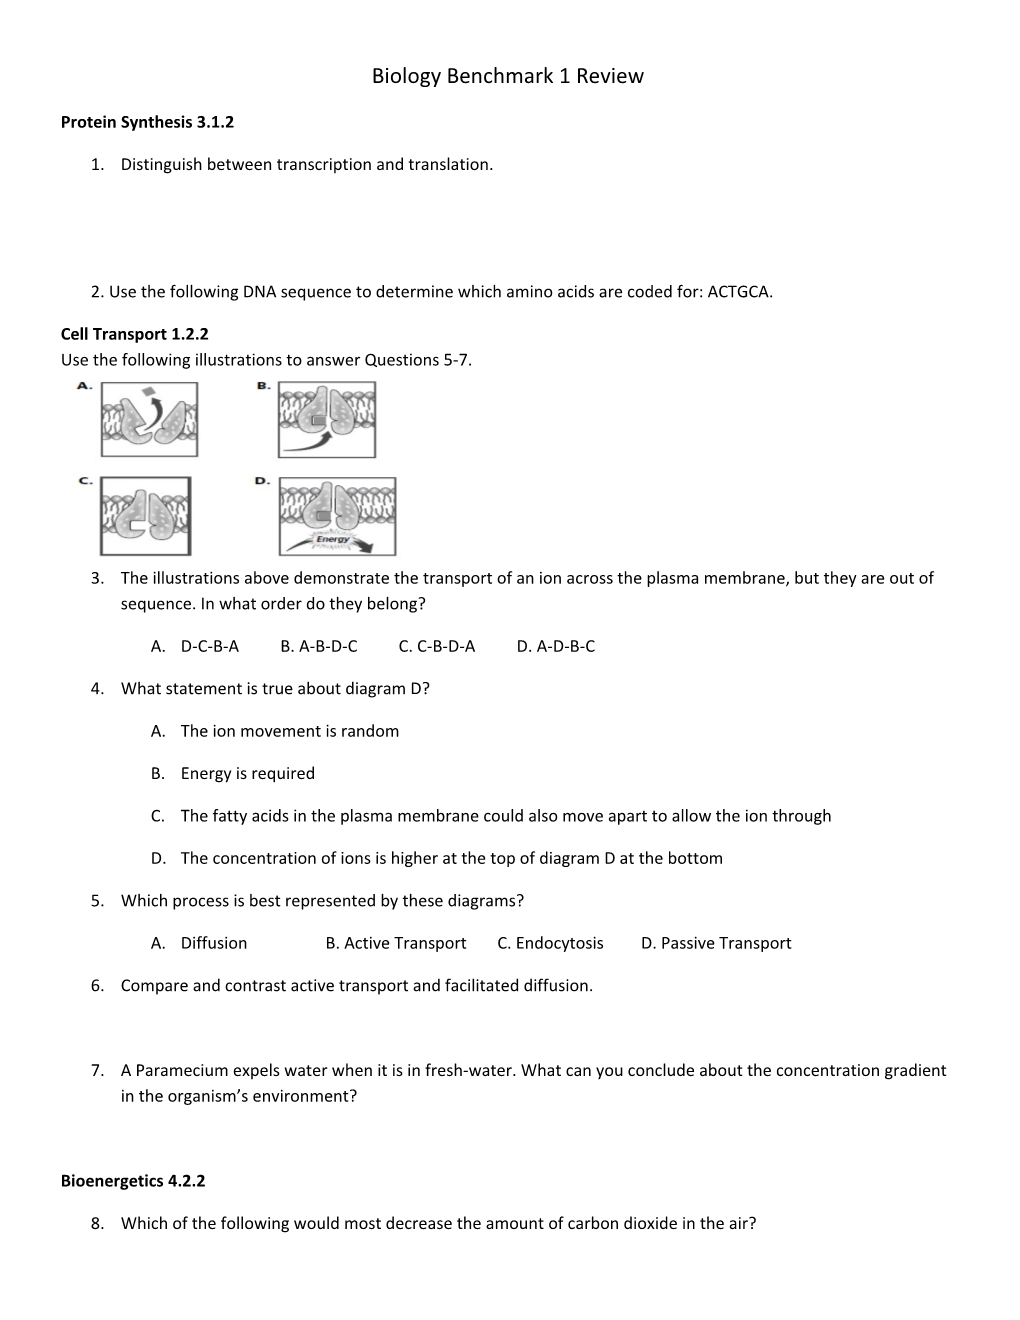 Biology Midterm Review Continued